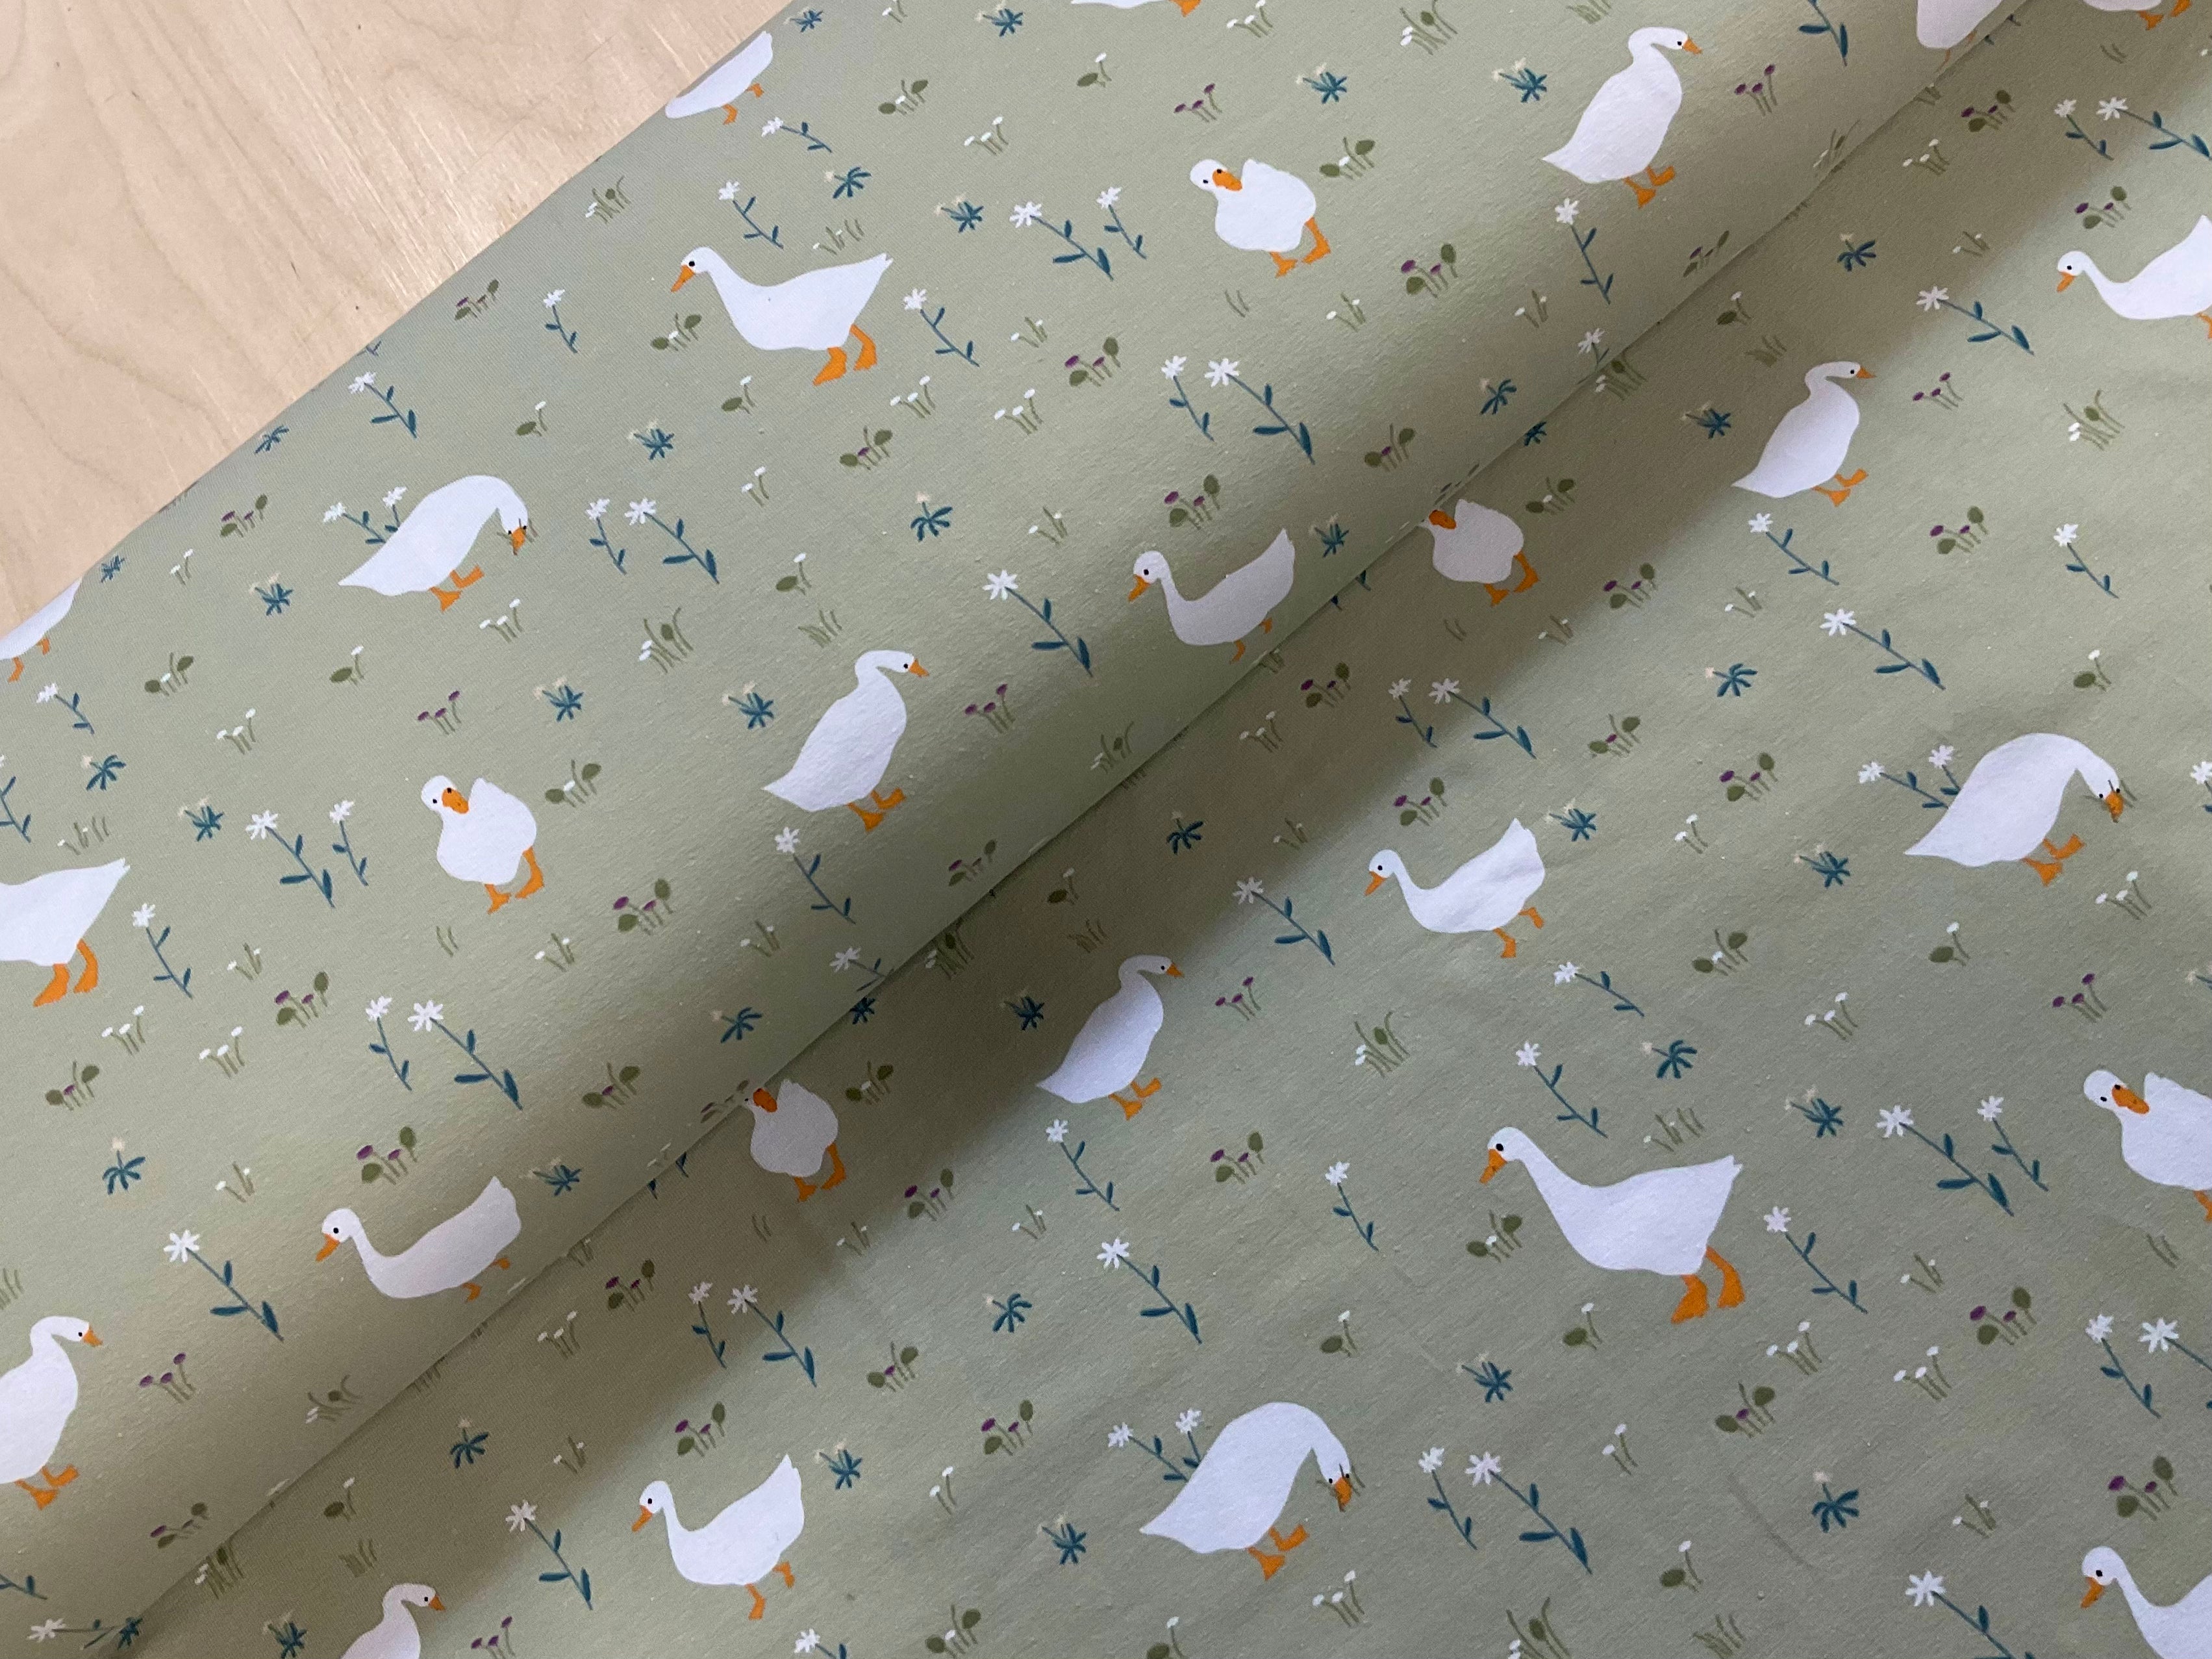 Geese on Pea Green Cotton Jersey Fabric